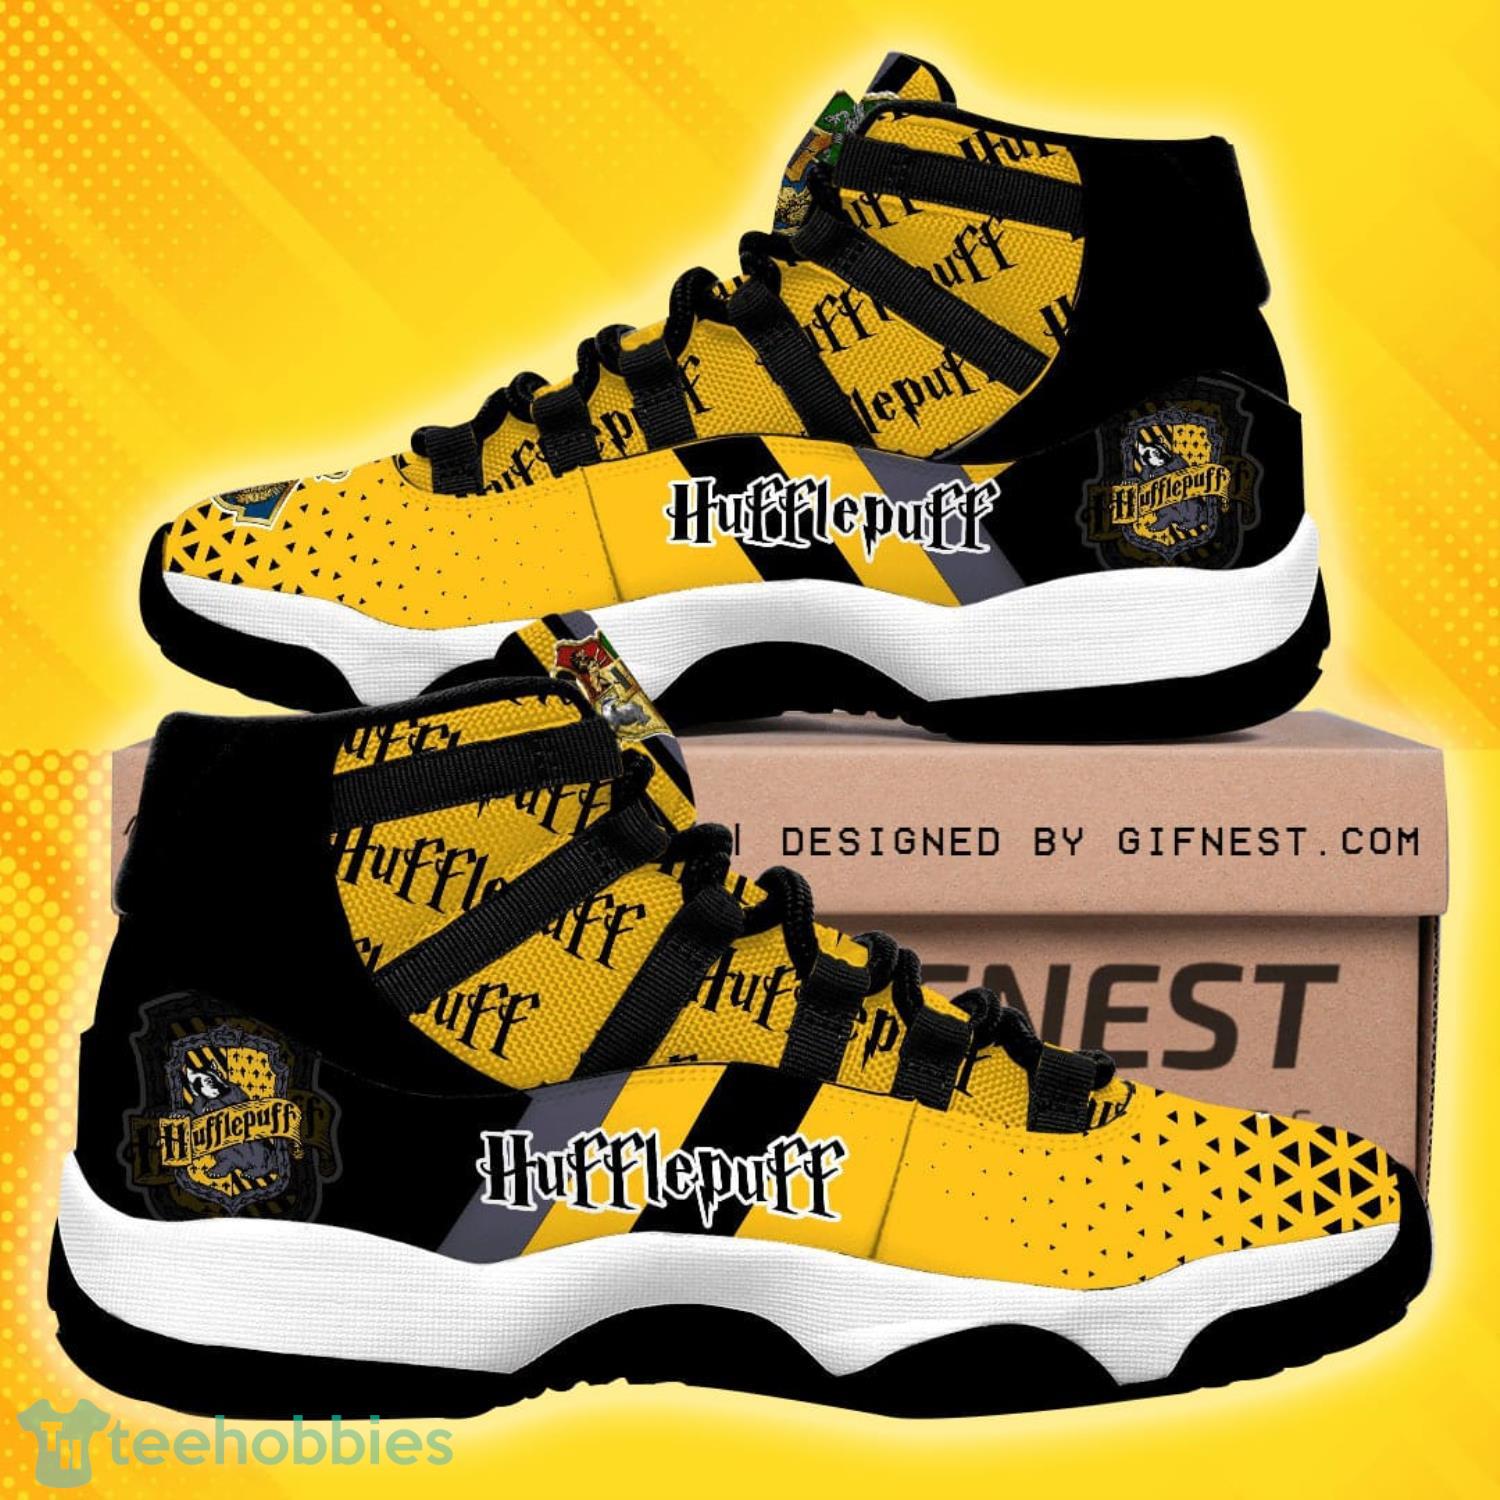 Hufflepuff Team Air Jordan 11 Shoes For Fans Product Photo 1